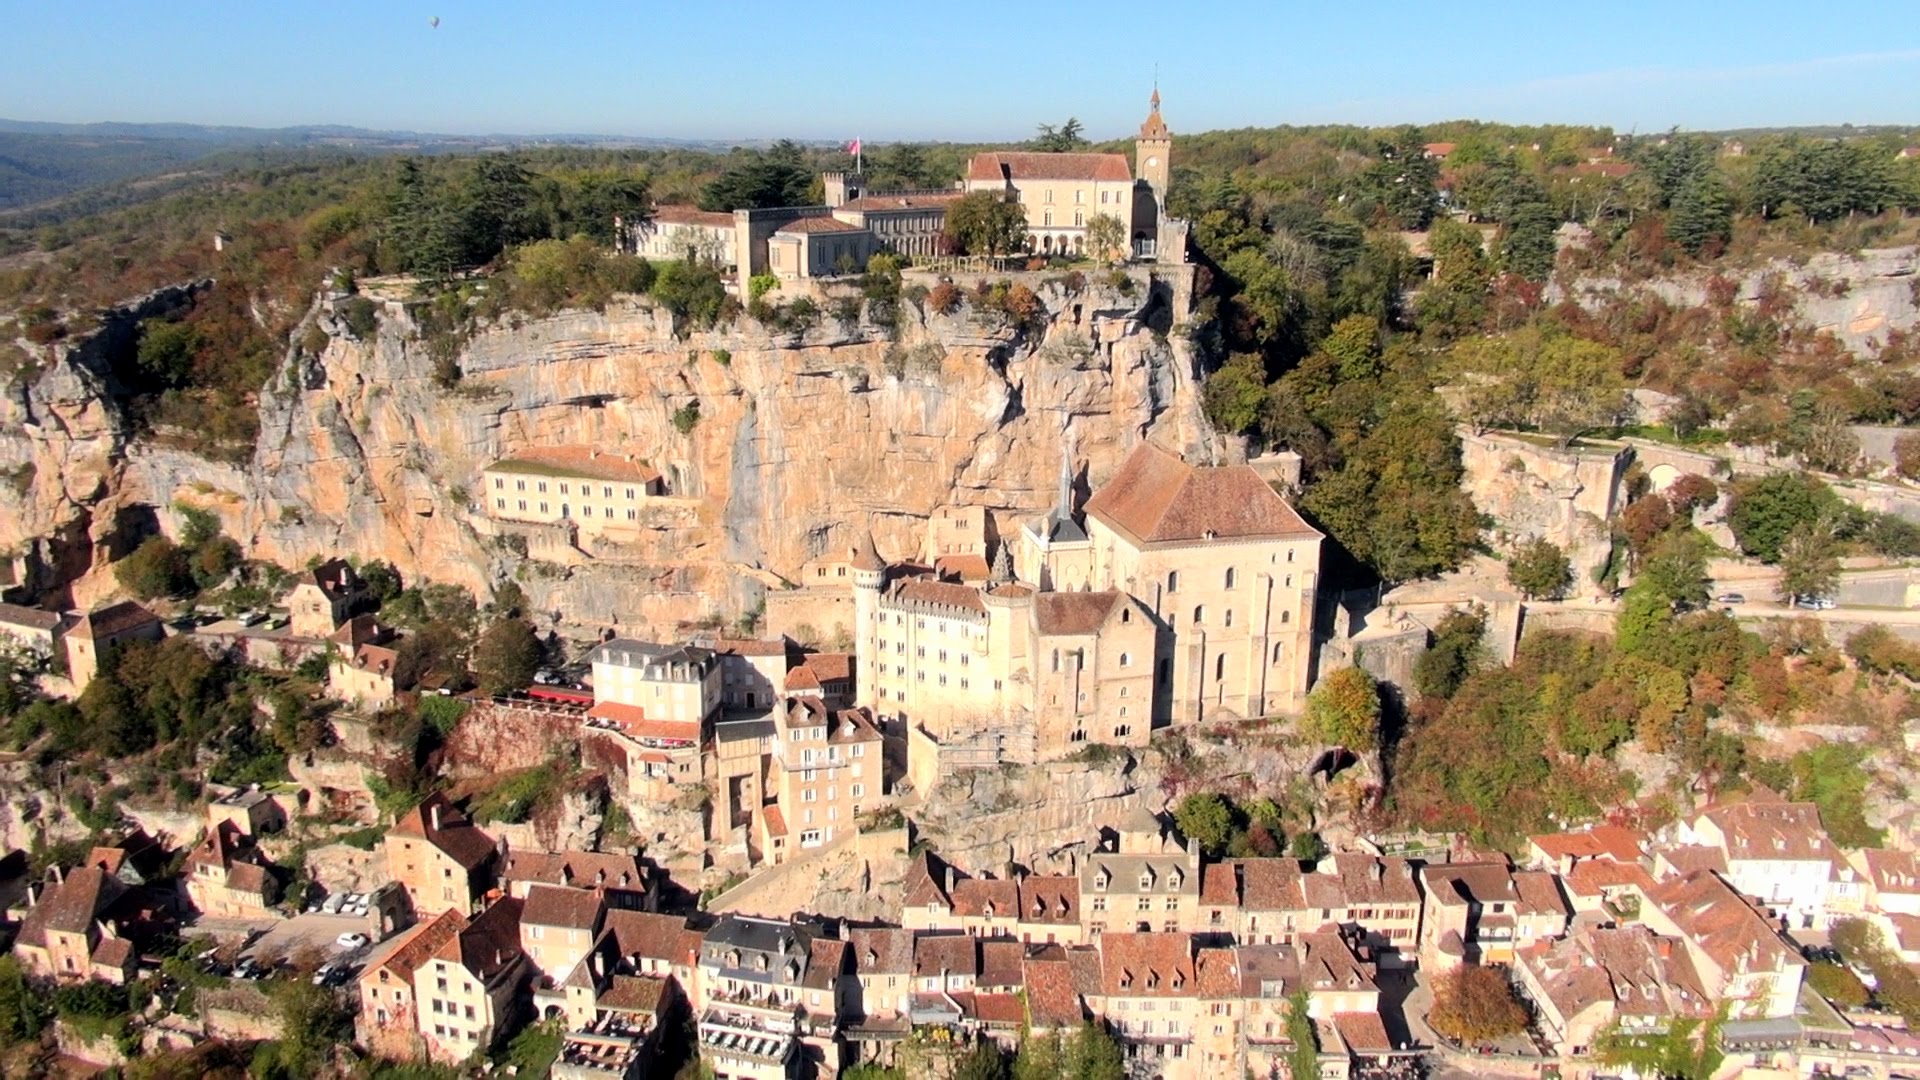 Images of Rocamadour | 1920x1080